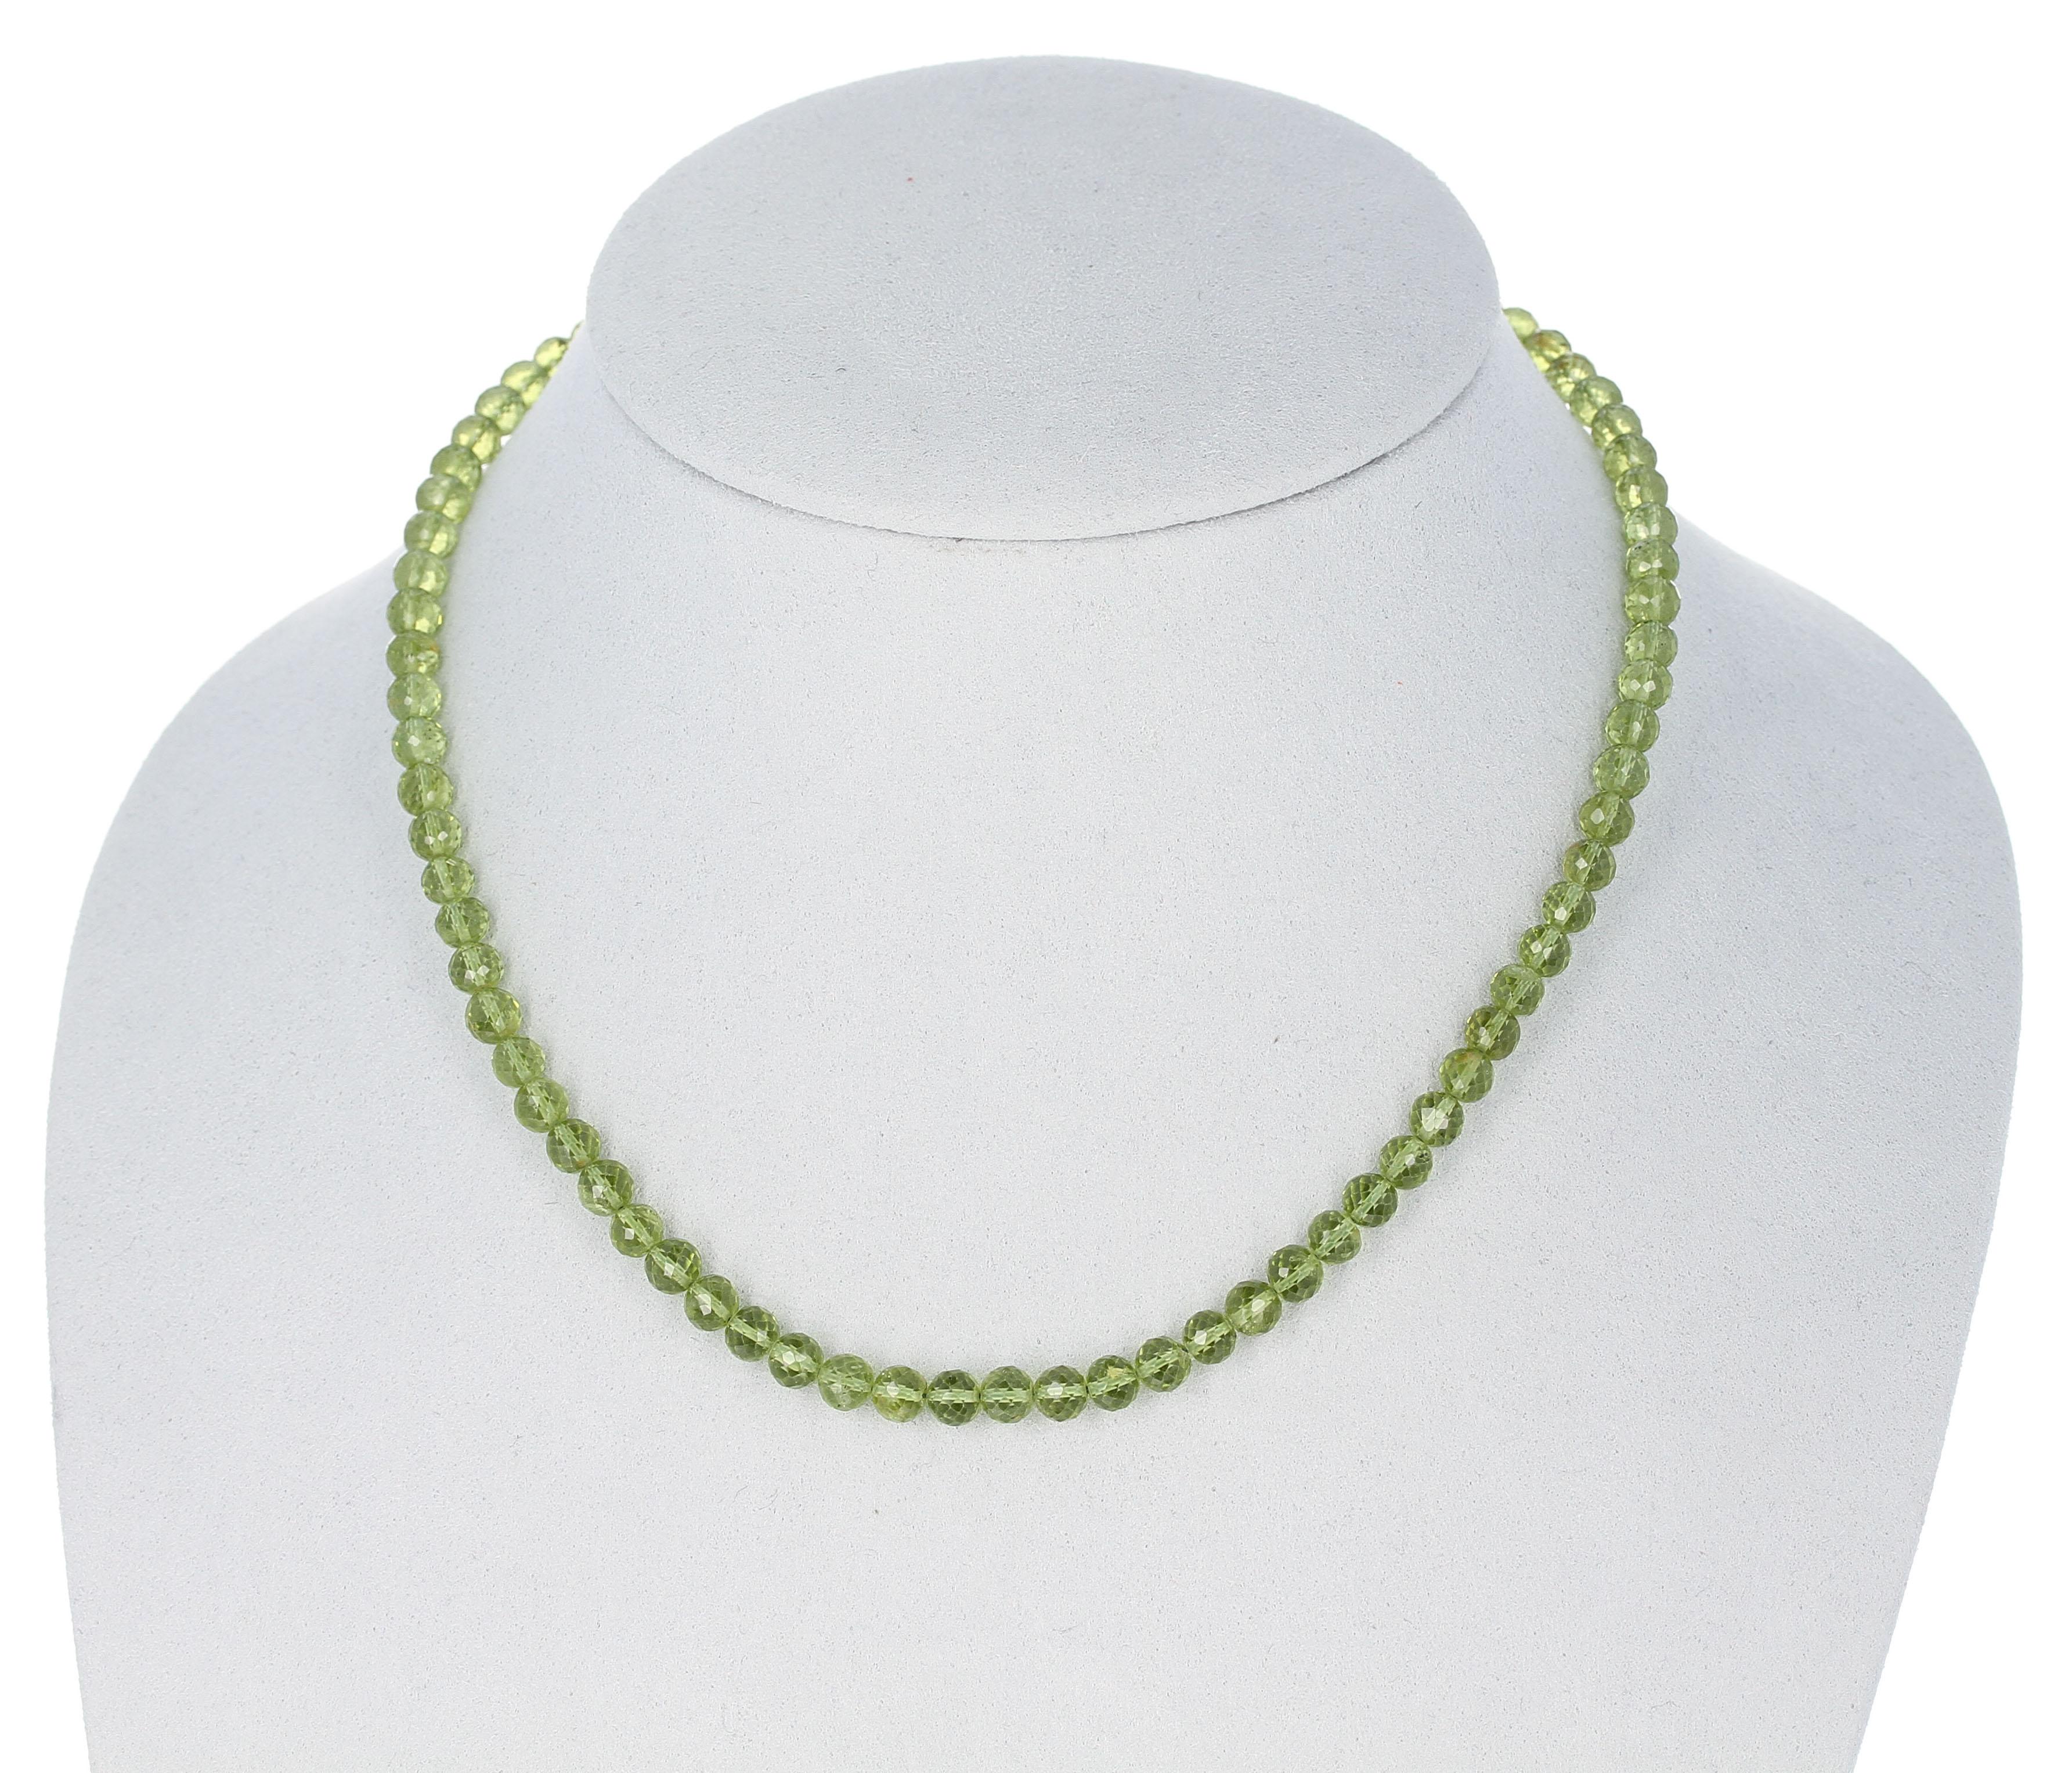 A strand of Peridot Faceted Round Beads Necklace with a Sterling Silver Toggle Clasp. Length: 17.5